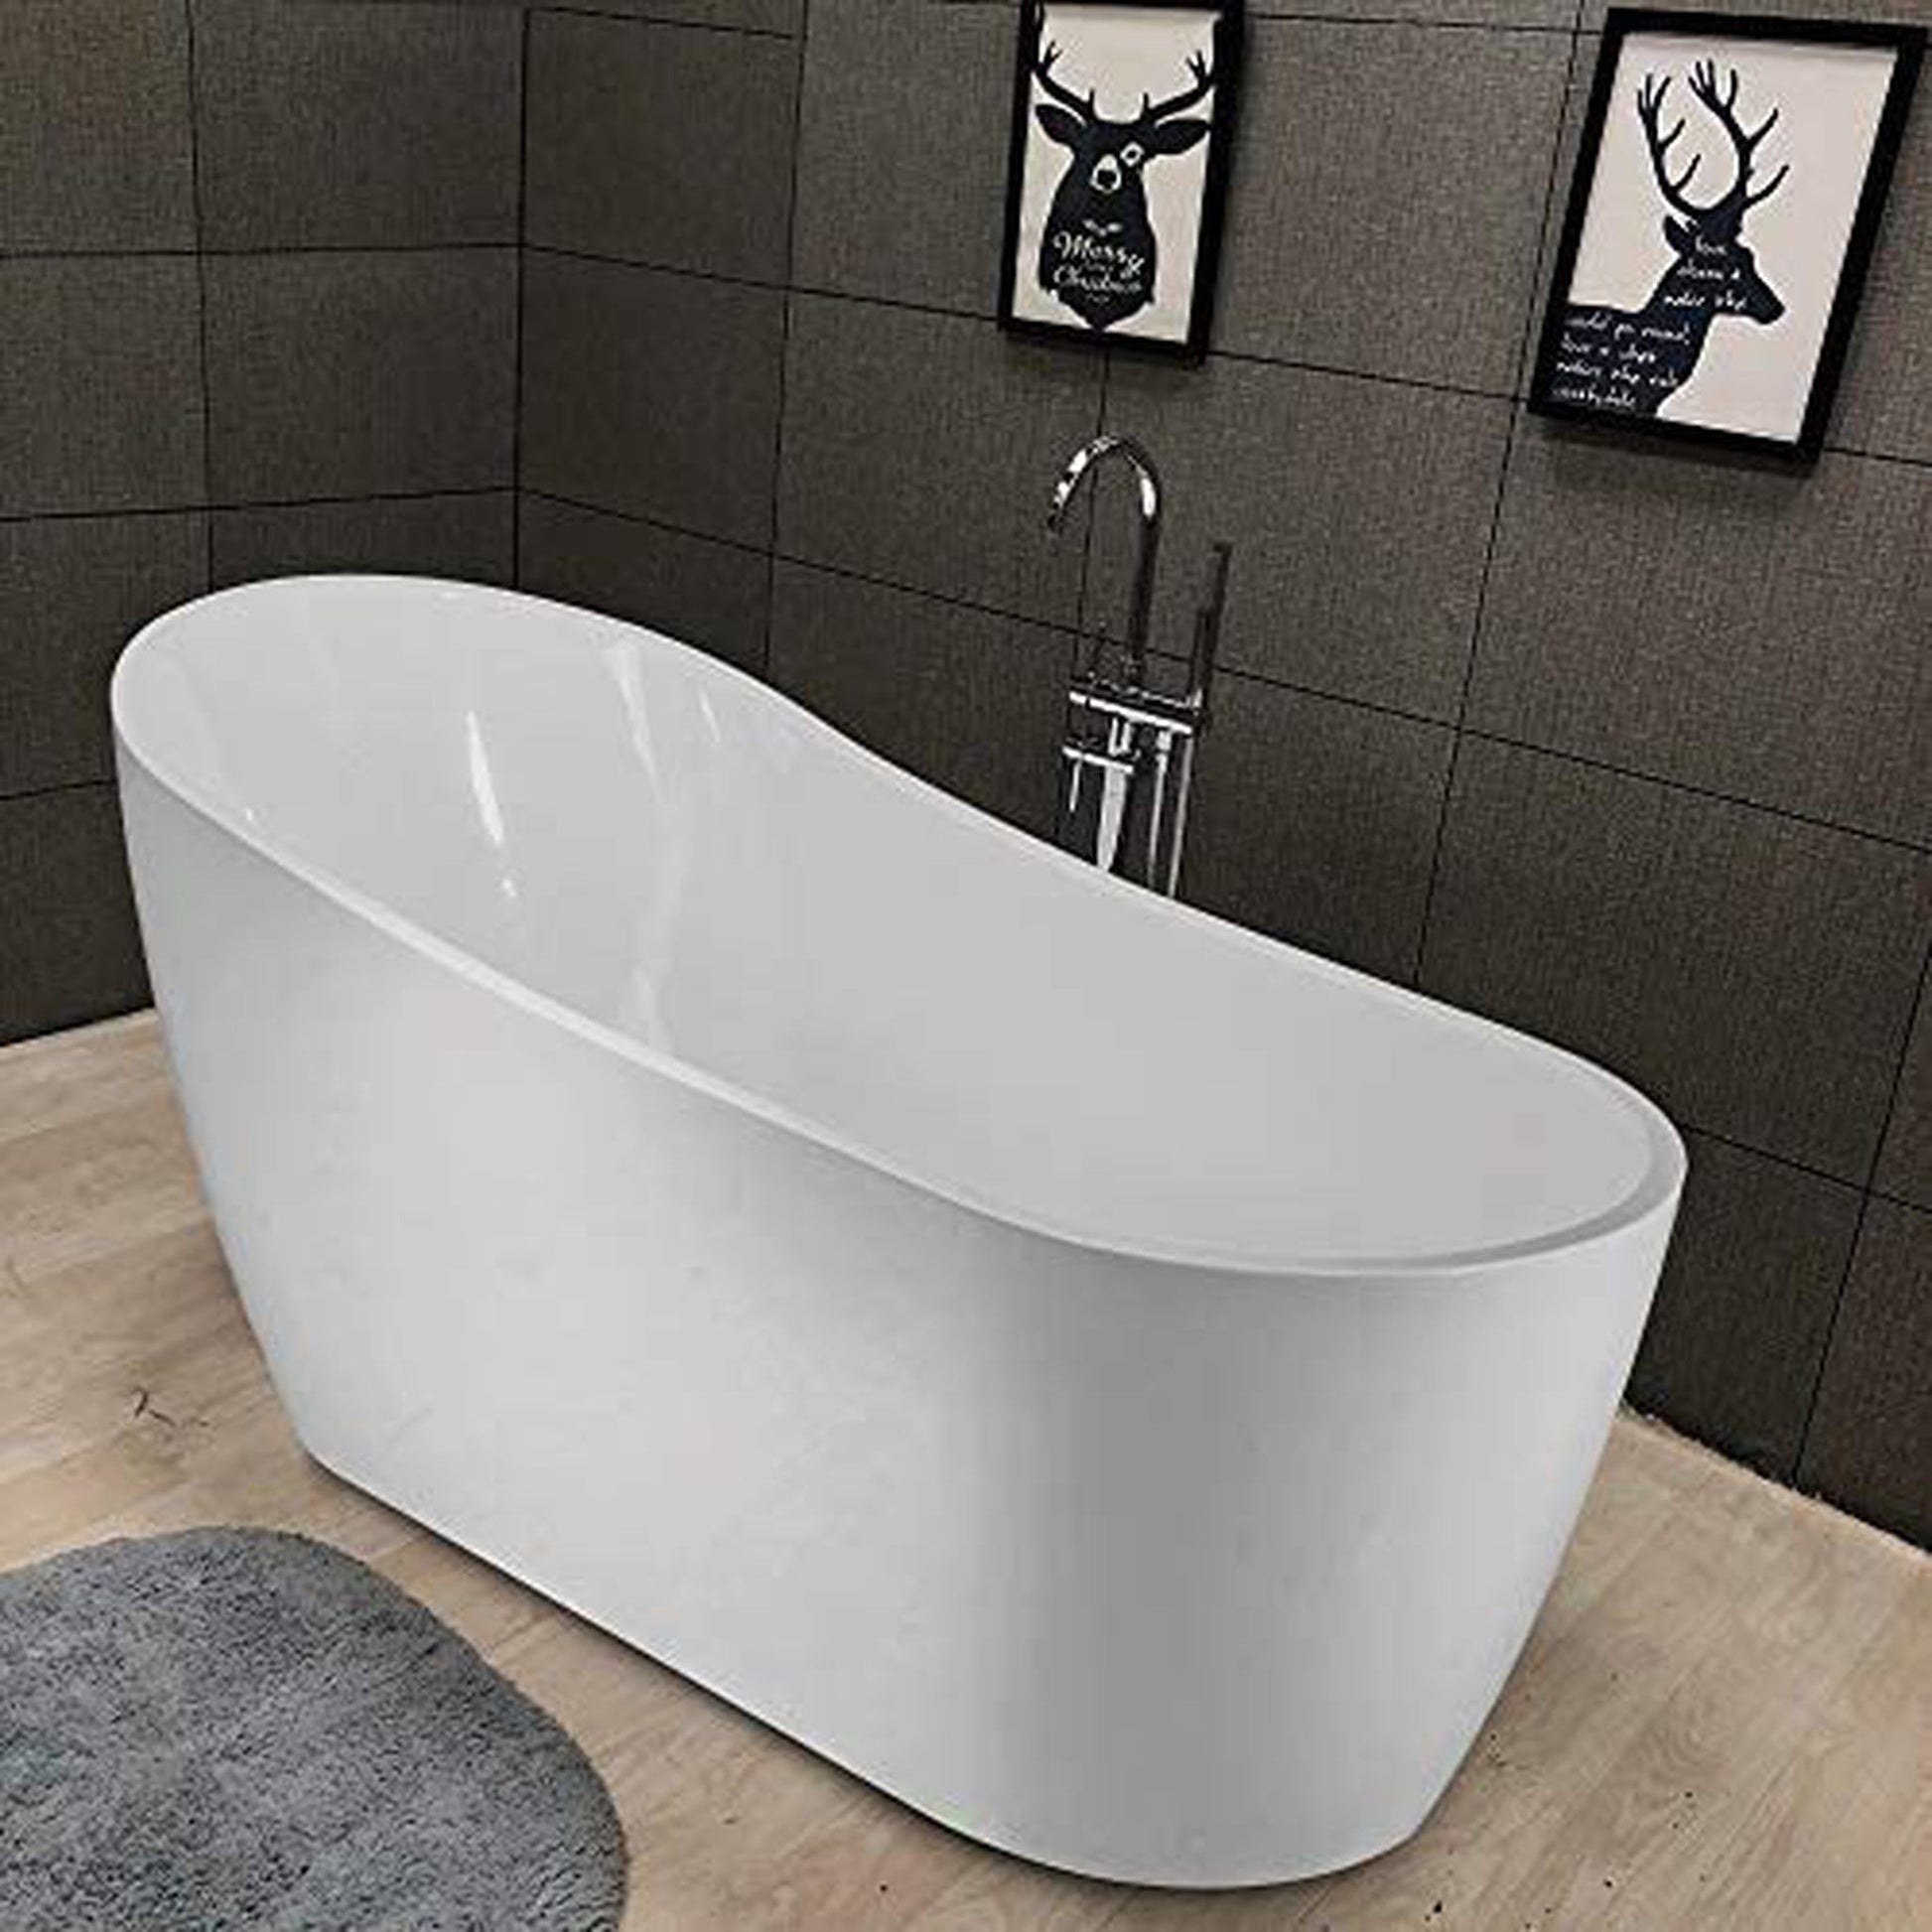 Vanity Art VA6904-L 67" White Acrylic Modern Stand Alone Soaking Tub With Polished Chrome Slotted Overflow and Pop-up Drain